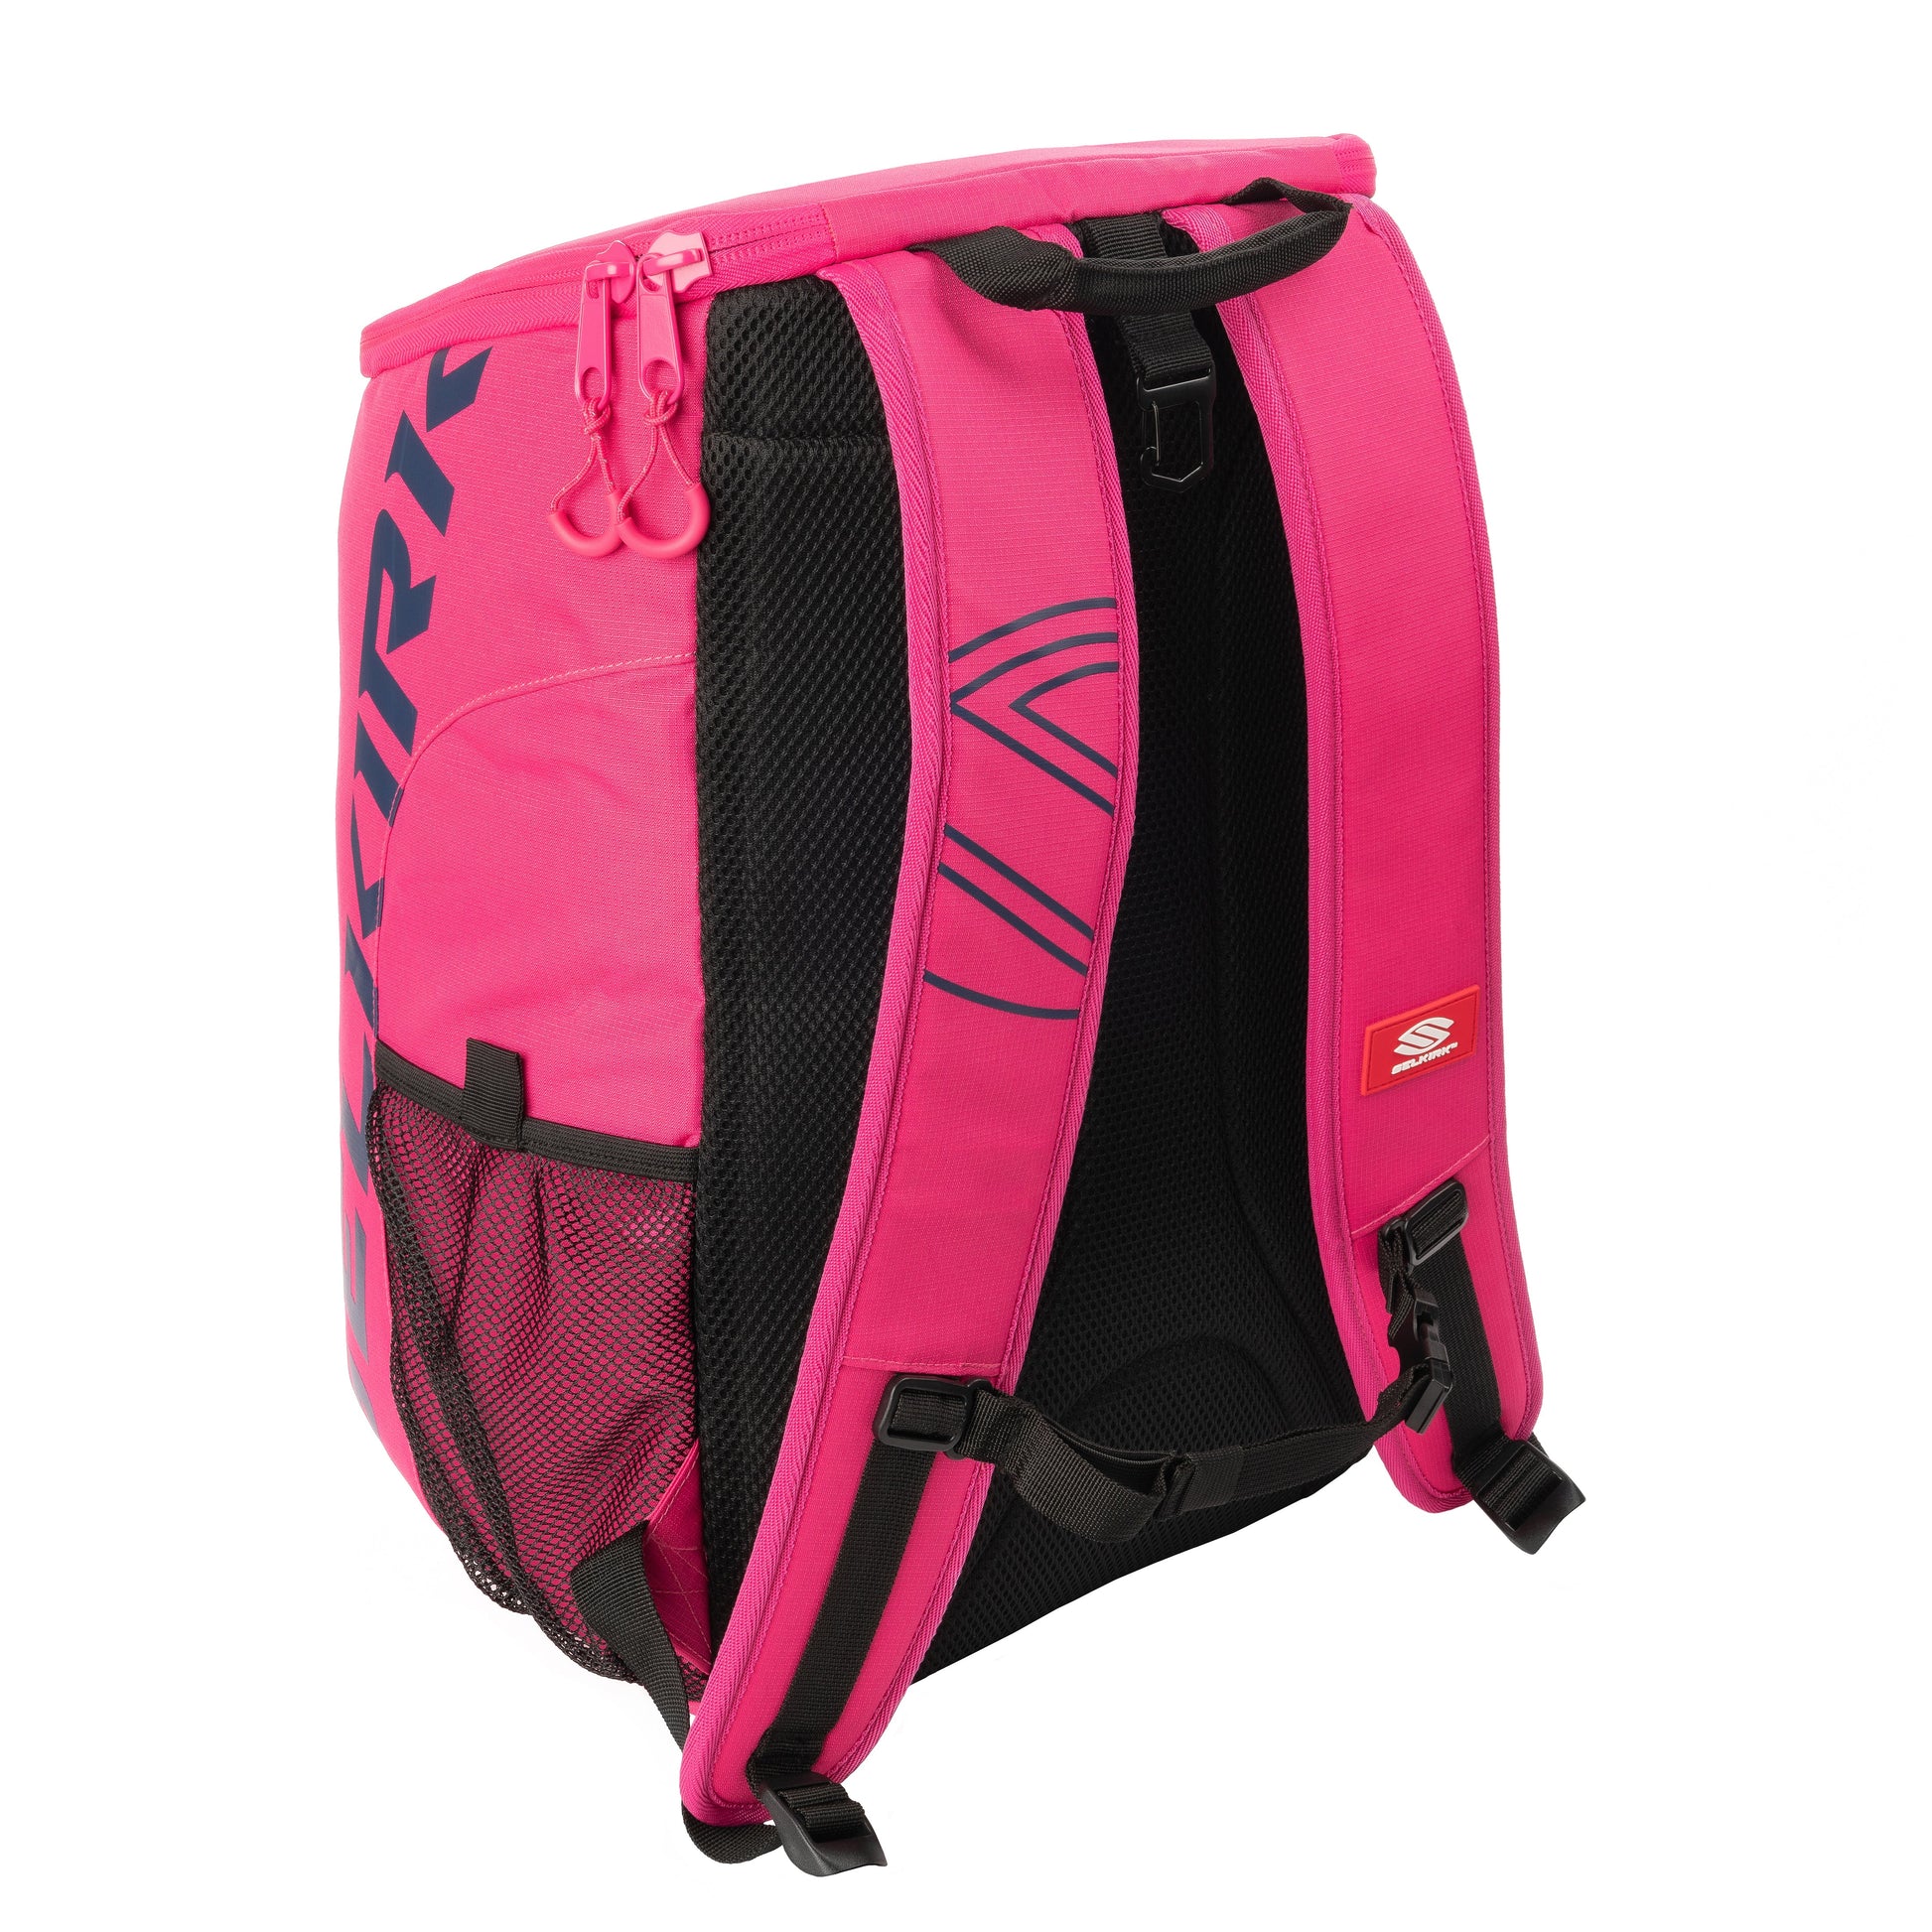 A Selkirk Core Series Team Backpack Pickleball Bag with a black strap.